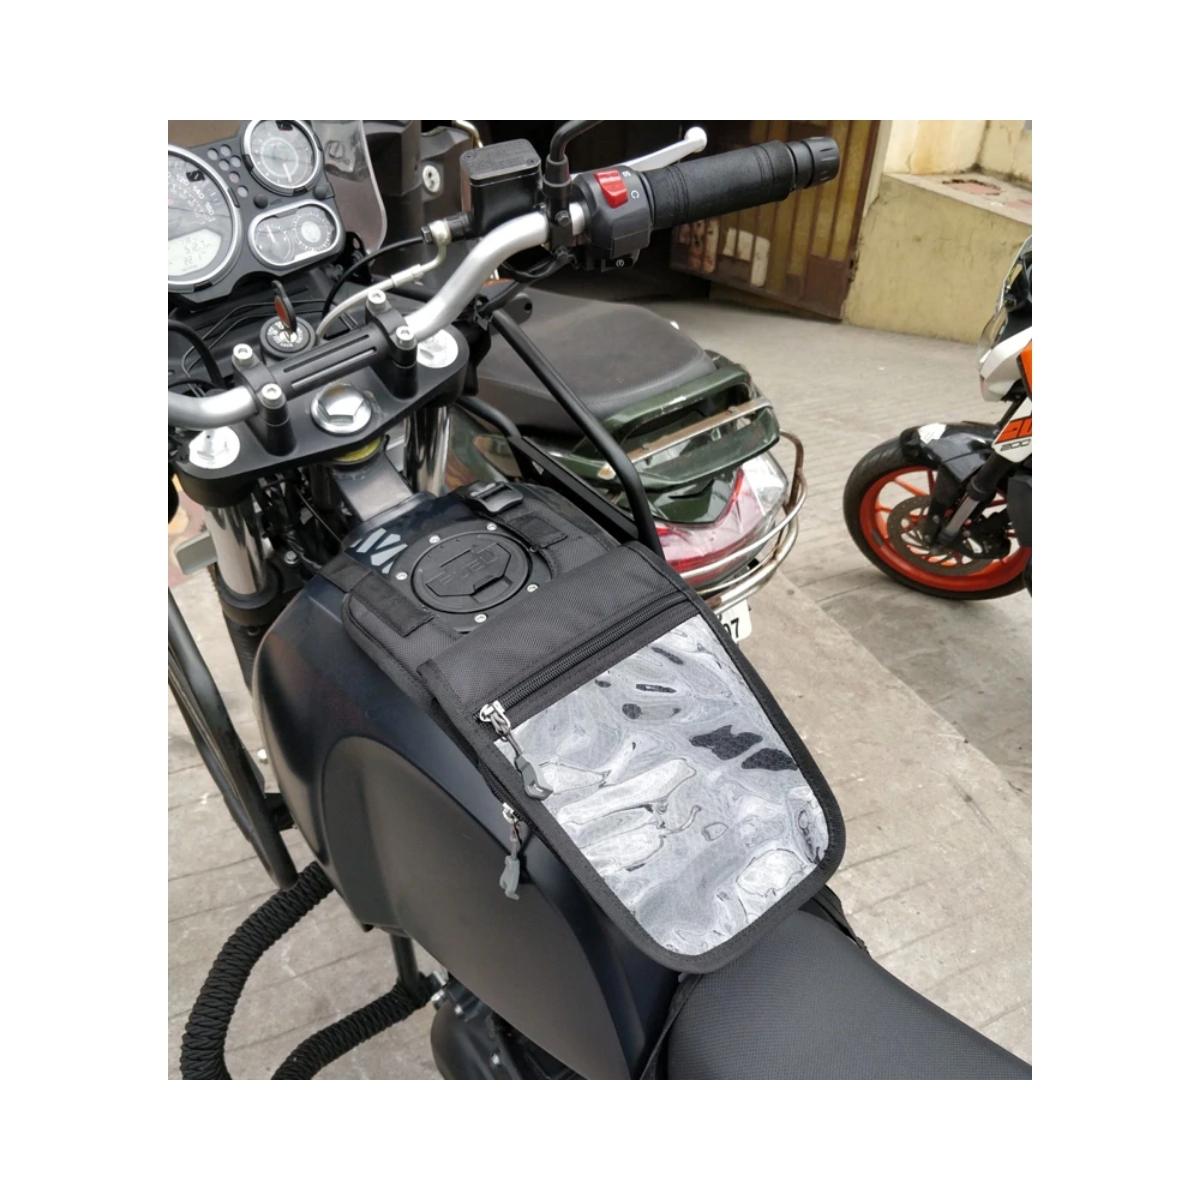 Wolverine Magnetic Tank Pouch - Open Road Pune | Riding Gear